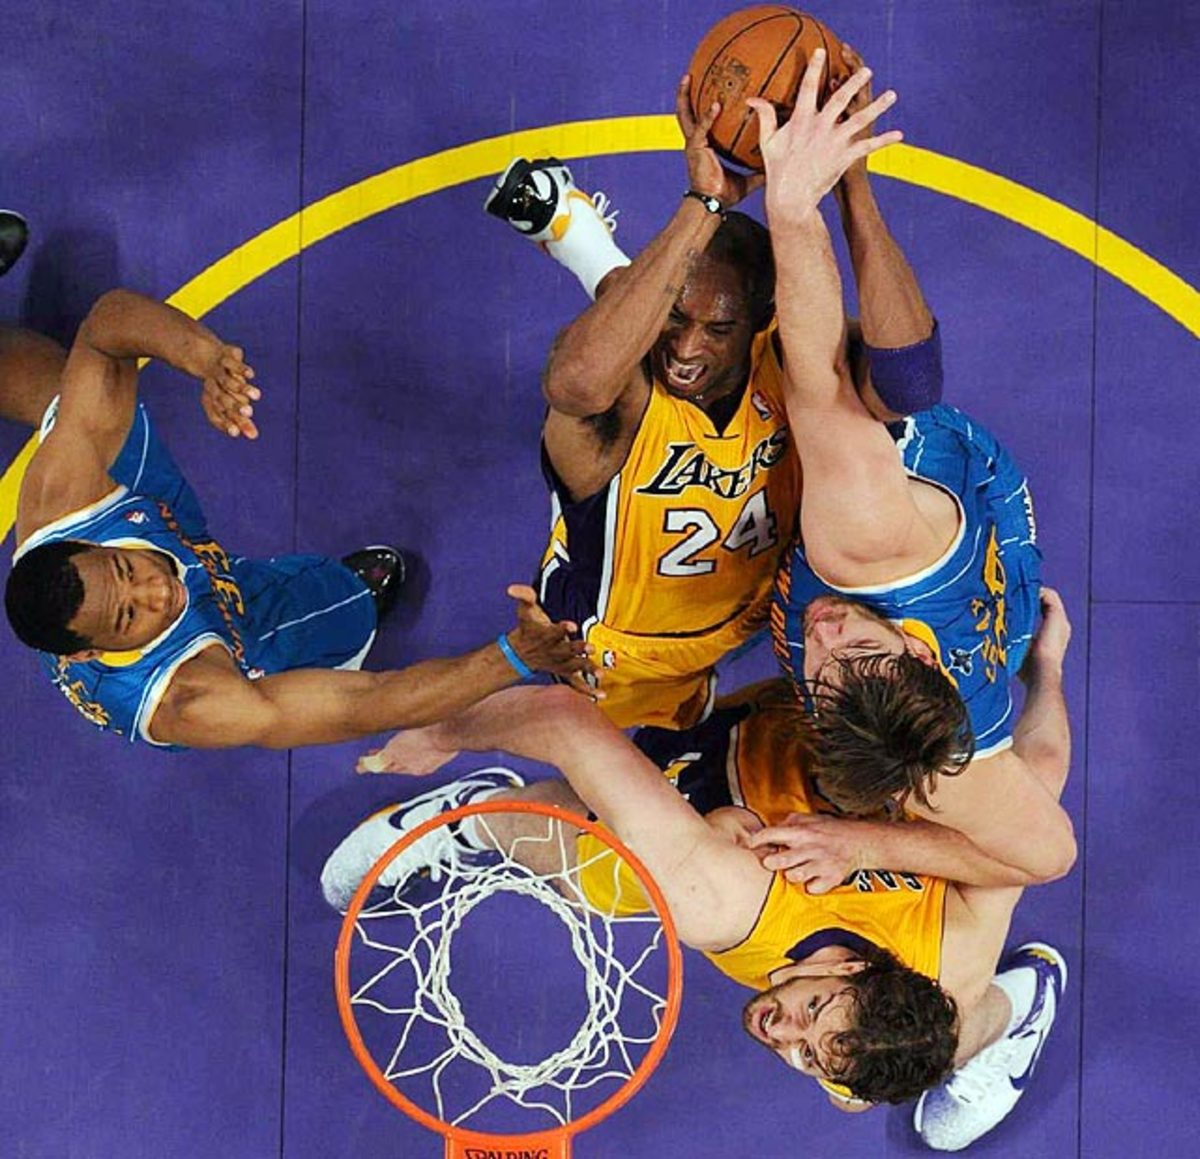 lakers-hornets-opy2-146510-mid.jpg